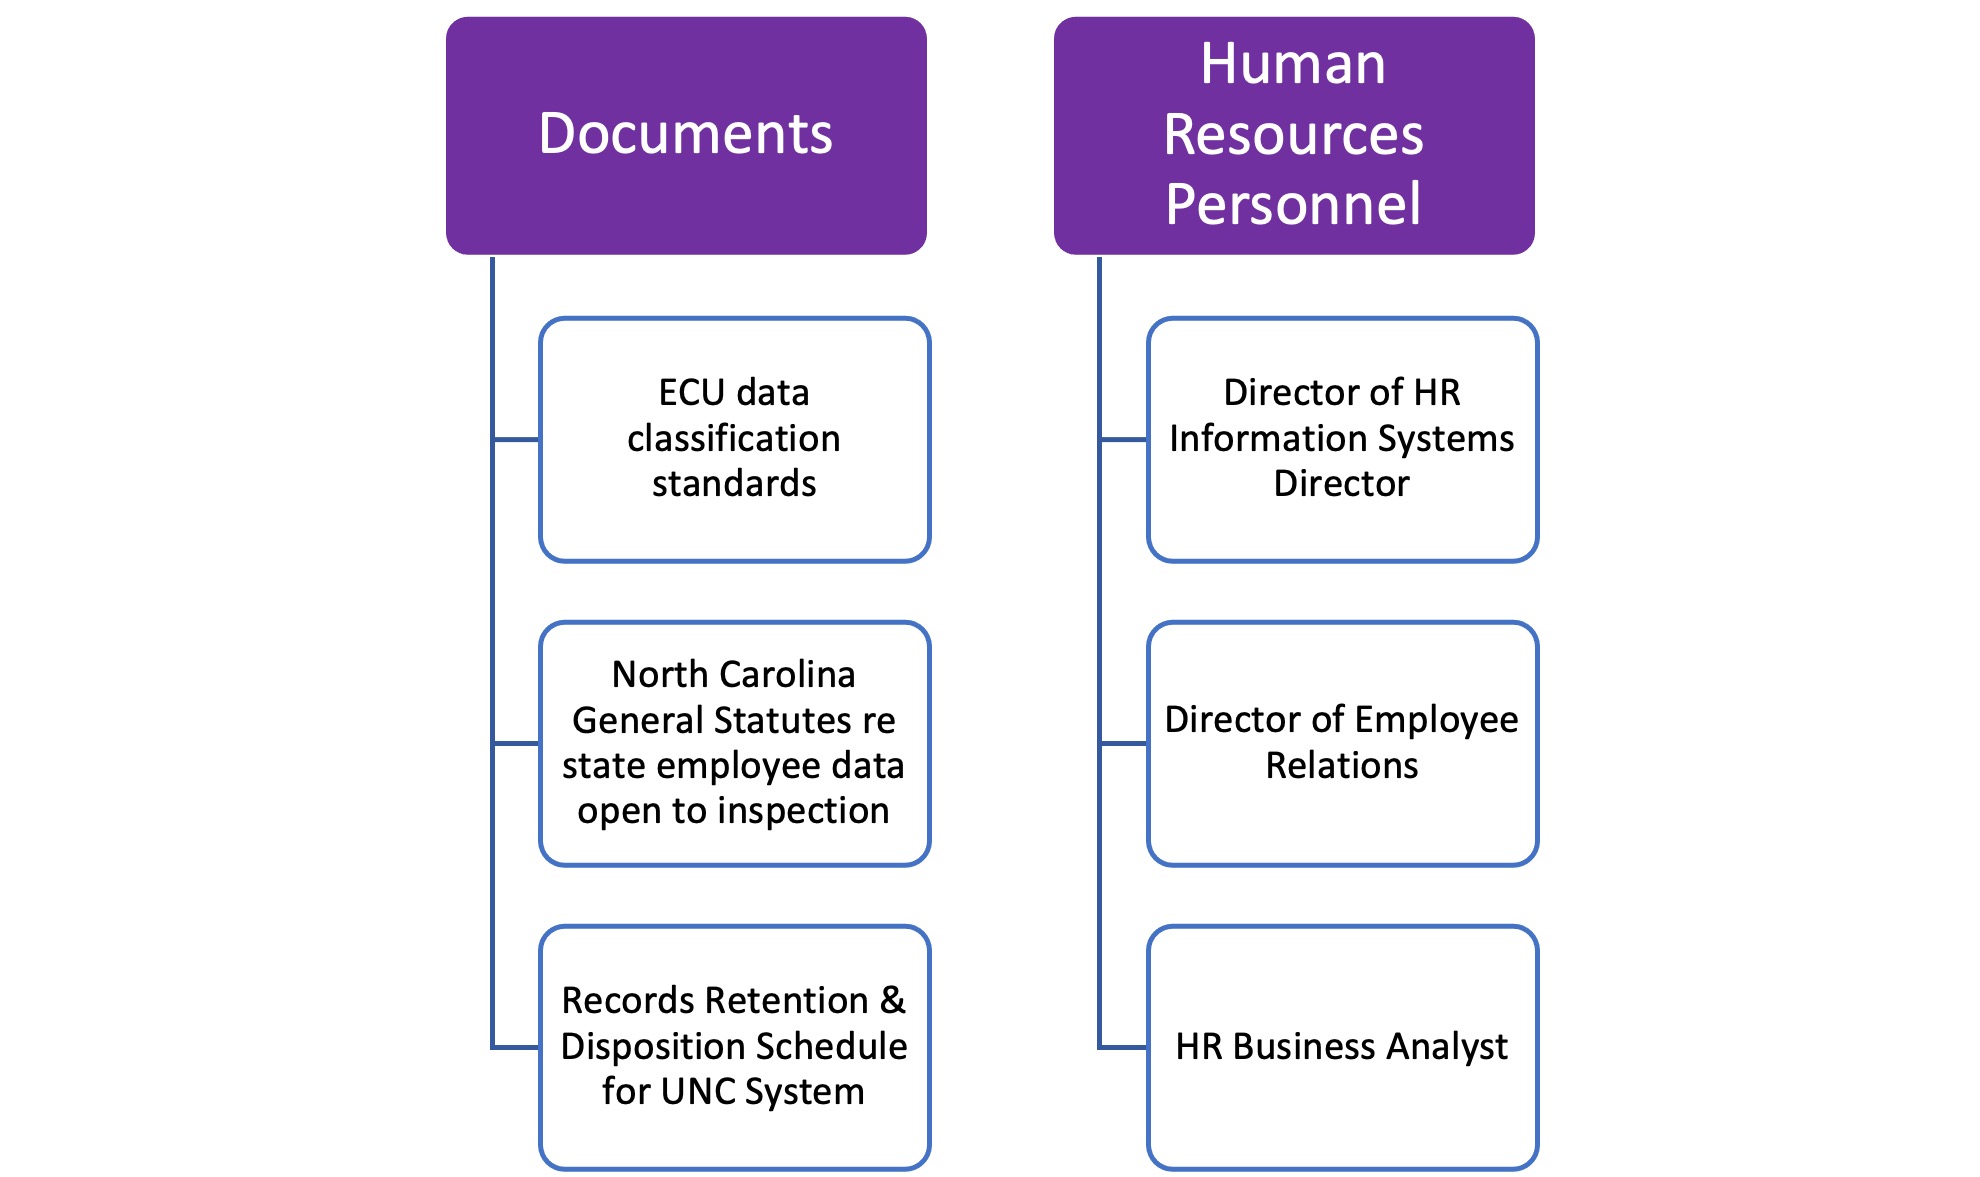 Documents inlcude: ECU data classification standards, North Carolina General Statutes re state employee data open to inspection, Records Retention & DIsposition, and Schedule for UNC System. Human Resources Personnel include:	Director of HR Information Systems Director, 	Director of Employee Relations,	and HR Business Analyst 